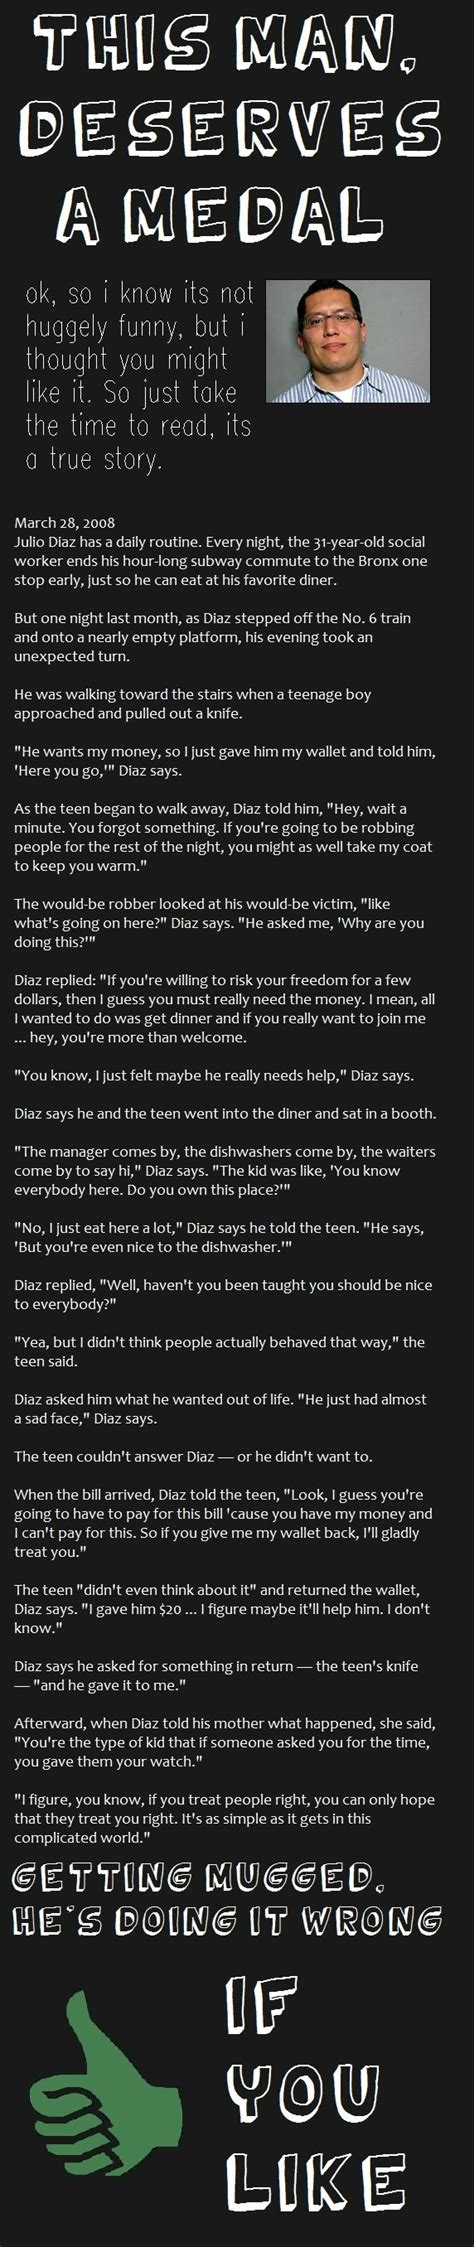 this is well worth a read so please take the time to read it it s a very nice story imgur